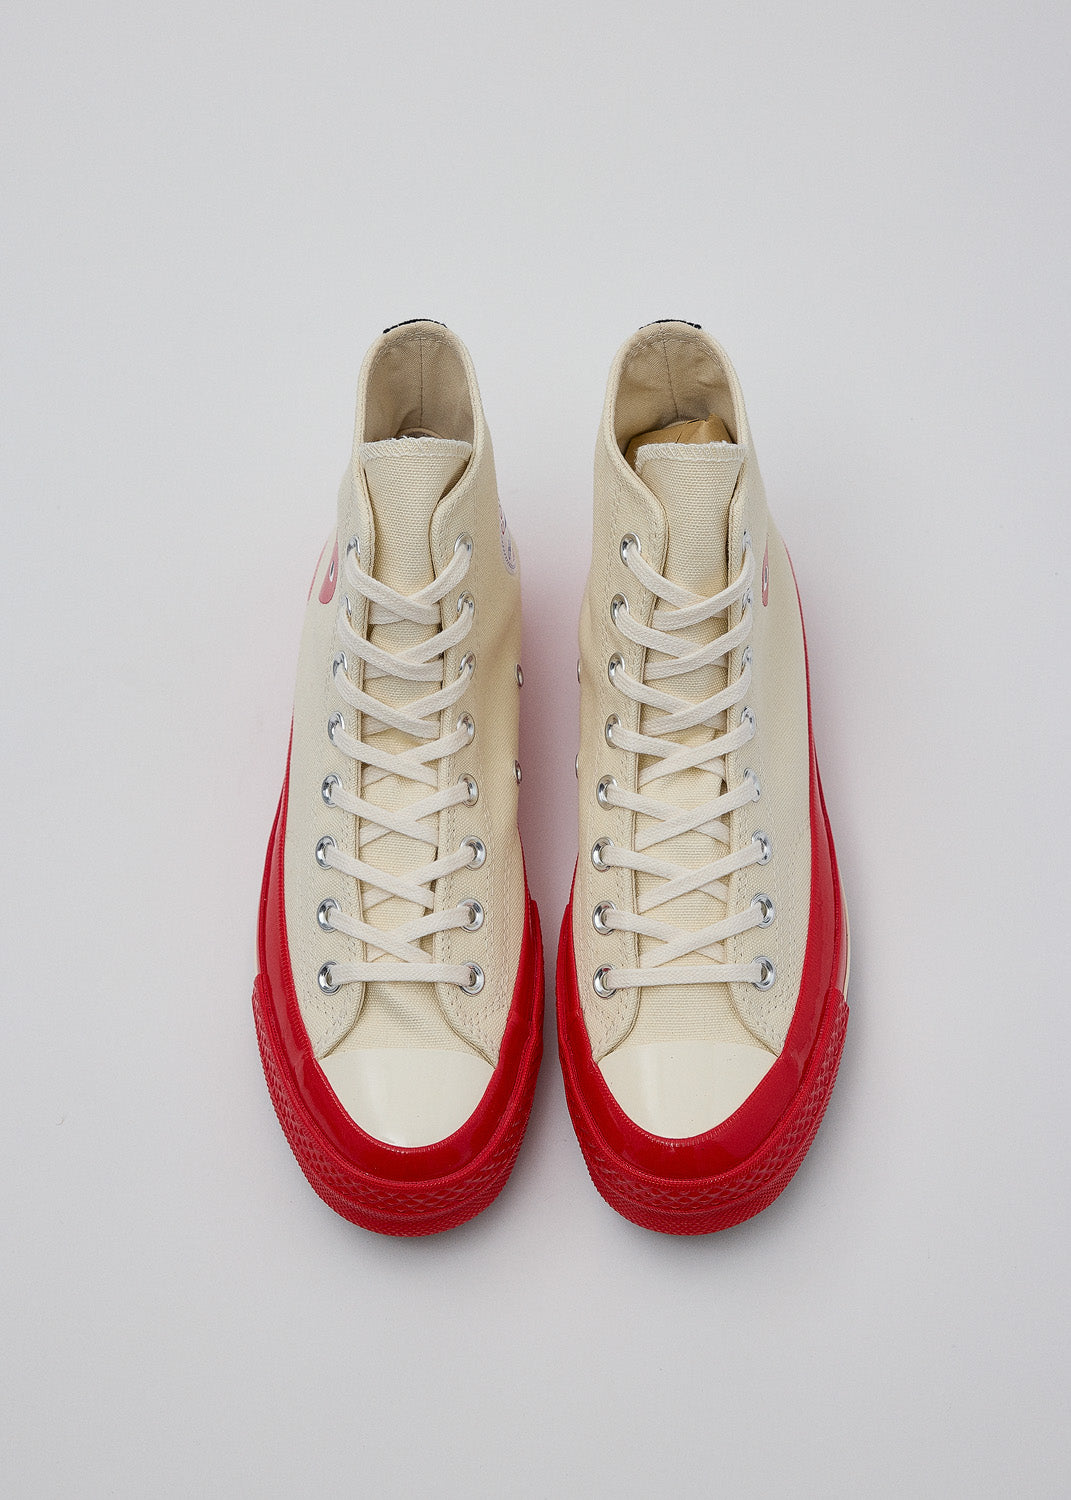 Comme des Garçons PLAY - Off-White Converse Edition Red Sole Chuck 70 High Sneakers | 1032 SPACE